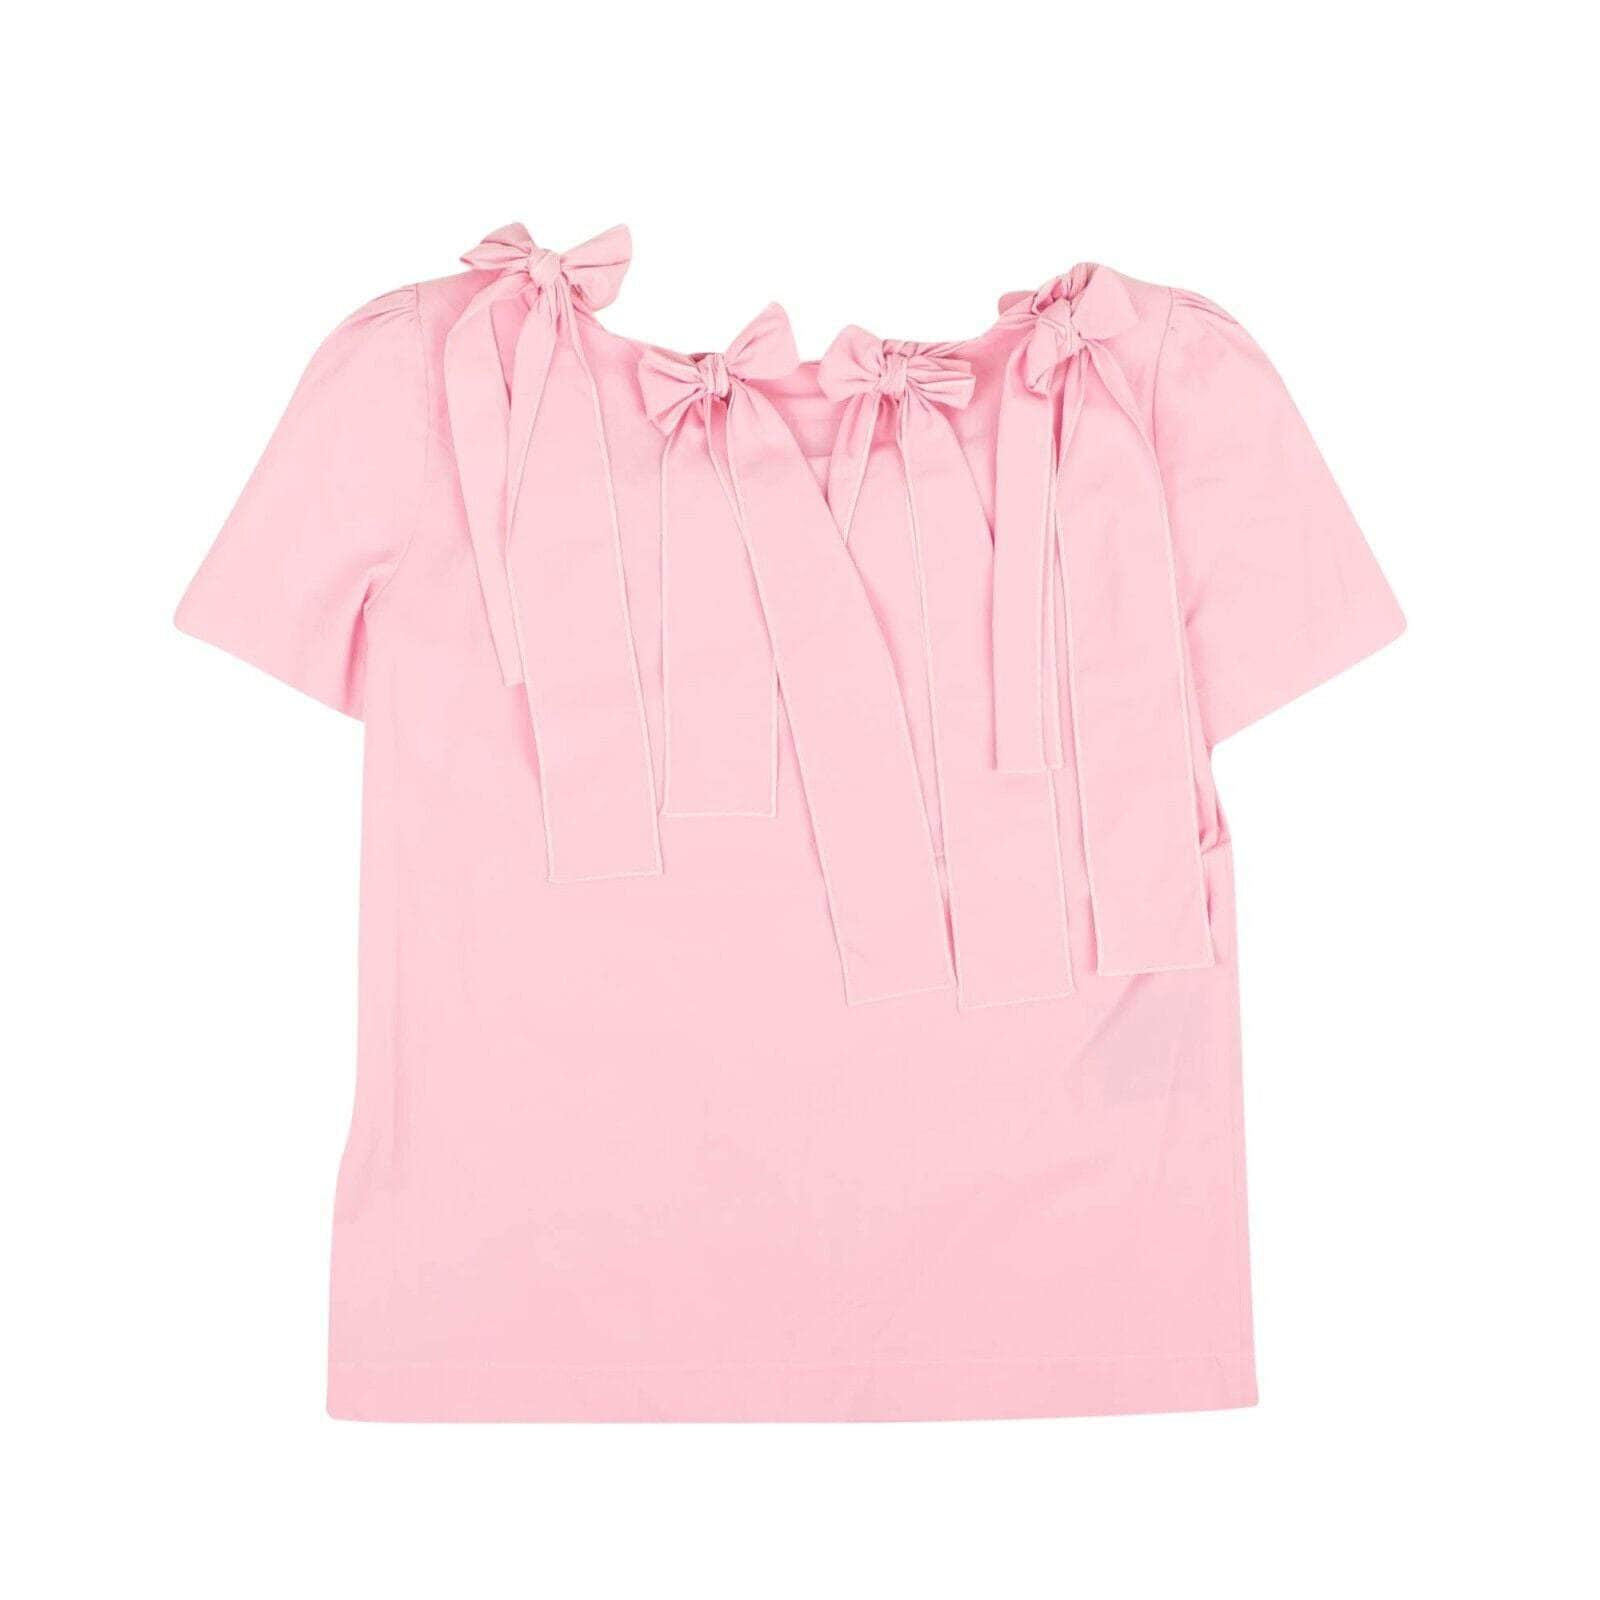 BOUTIQUE MOSCHINO boutique-moschino, channelenable-all, chicmi, couponcollection, gender-womens, main-clothing, size-36, size-38, size-44, under-250, womens-blouses Pink Bow Accented Short Sleeve Blouse